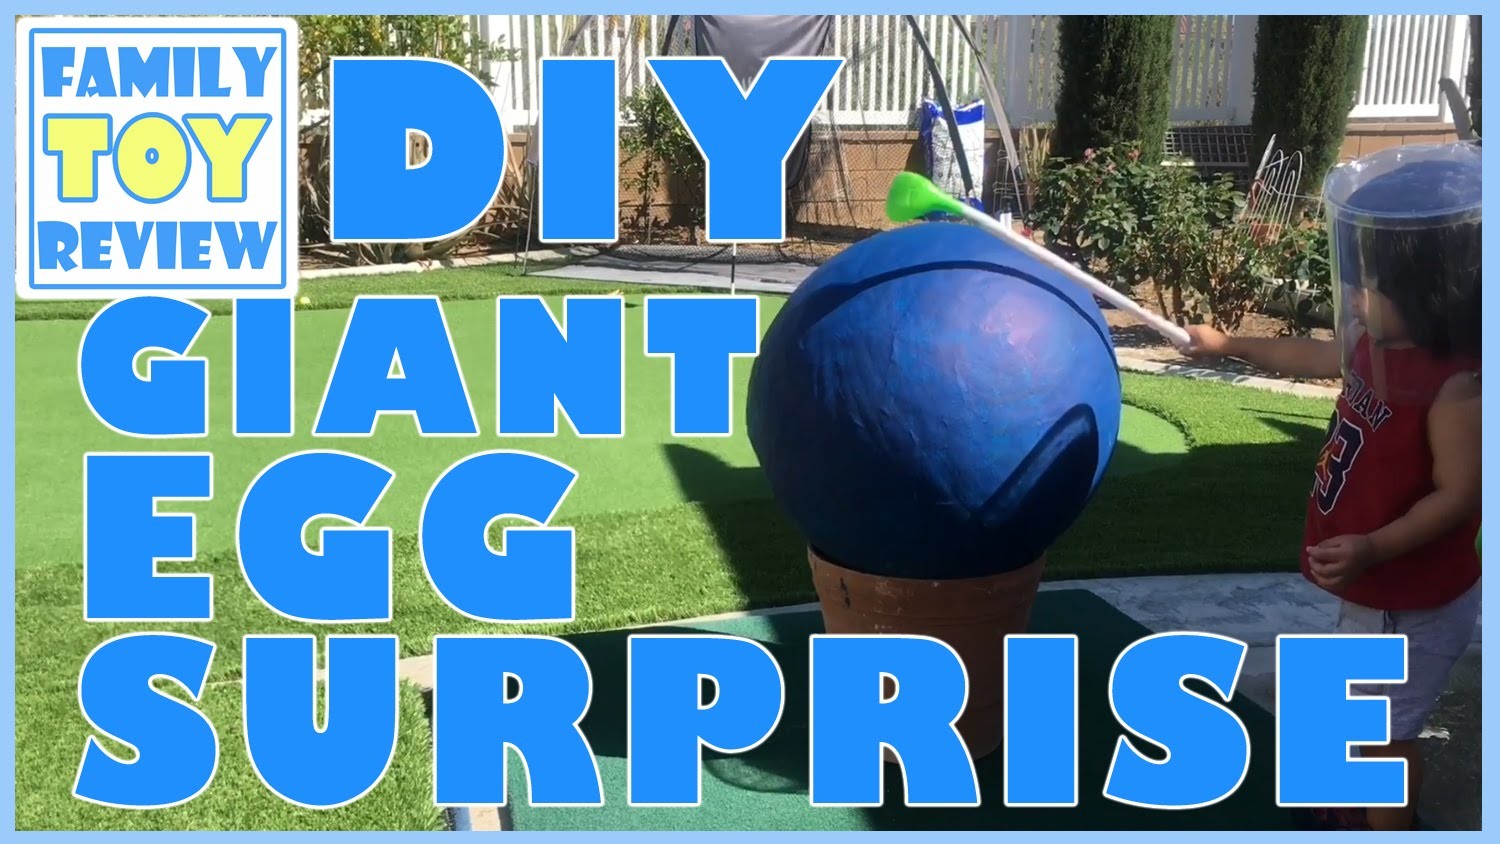 How To Make Giant Egg Surprise DIY with Surprise Toys Inside Homemade Easter Egg Pinata Craft